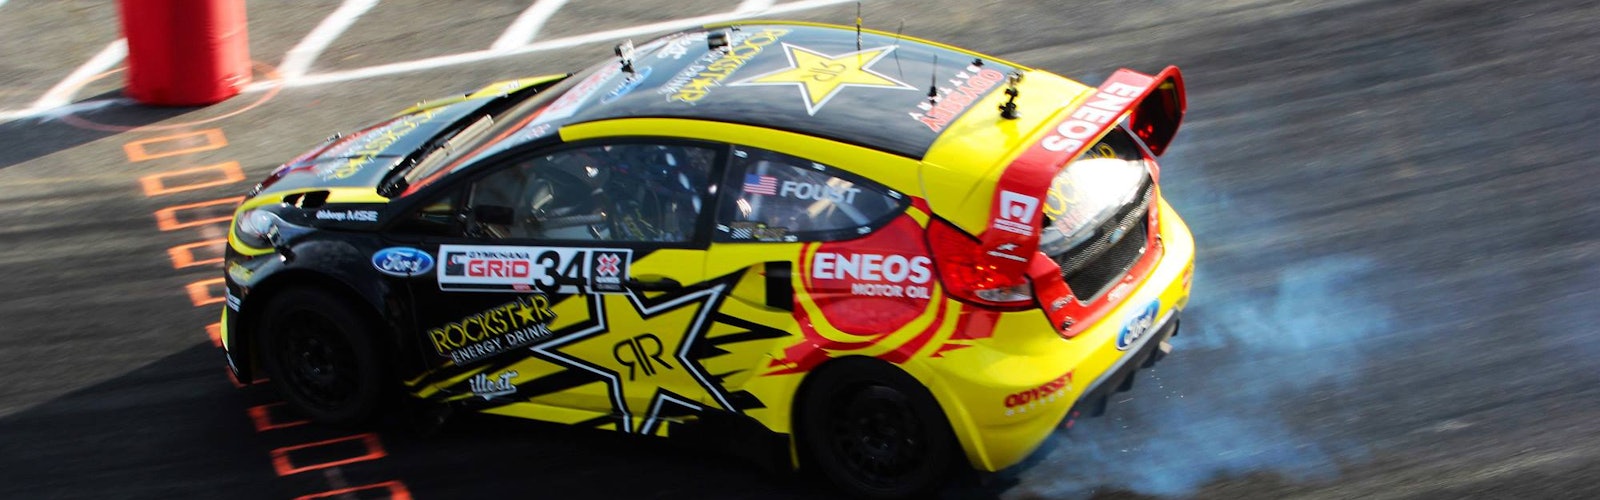 Tanner Foust, Ford Fiesta, 2013 X Games Los Angeles, Gymkhana